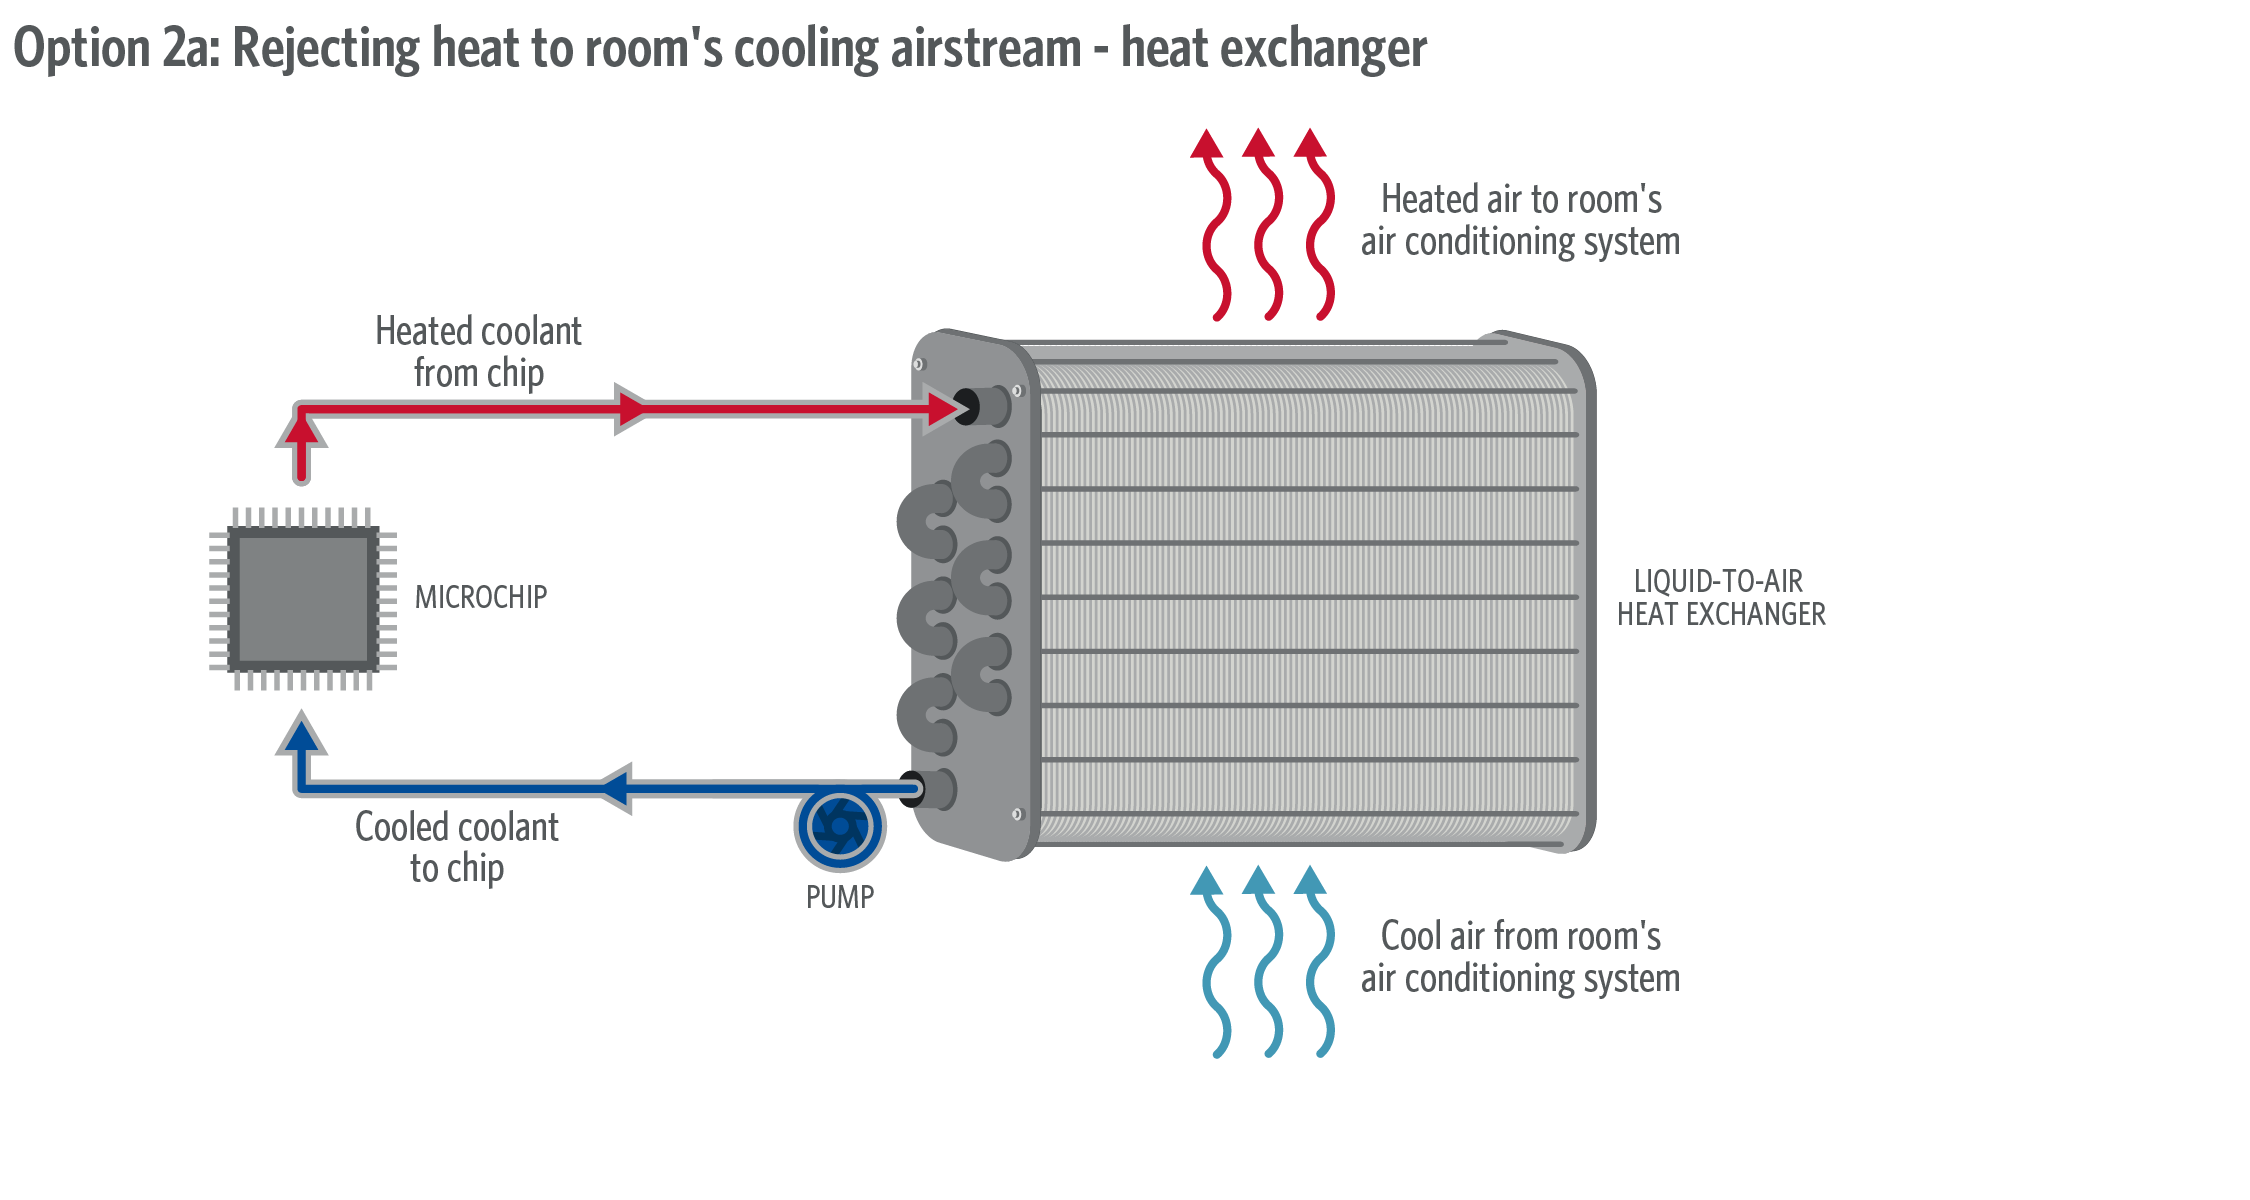 Rejecting heat to room's cooling airstream heat exchanger.